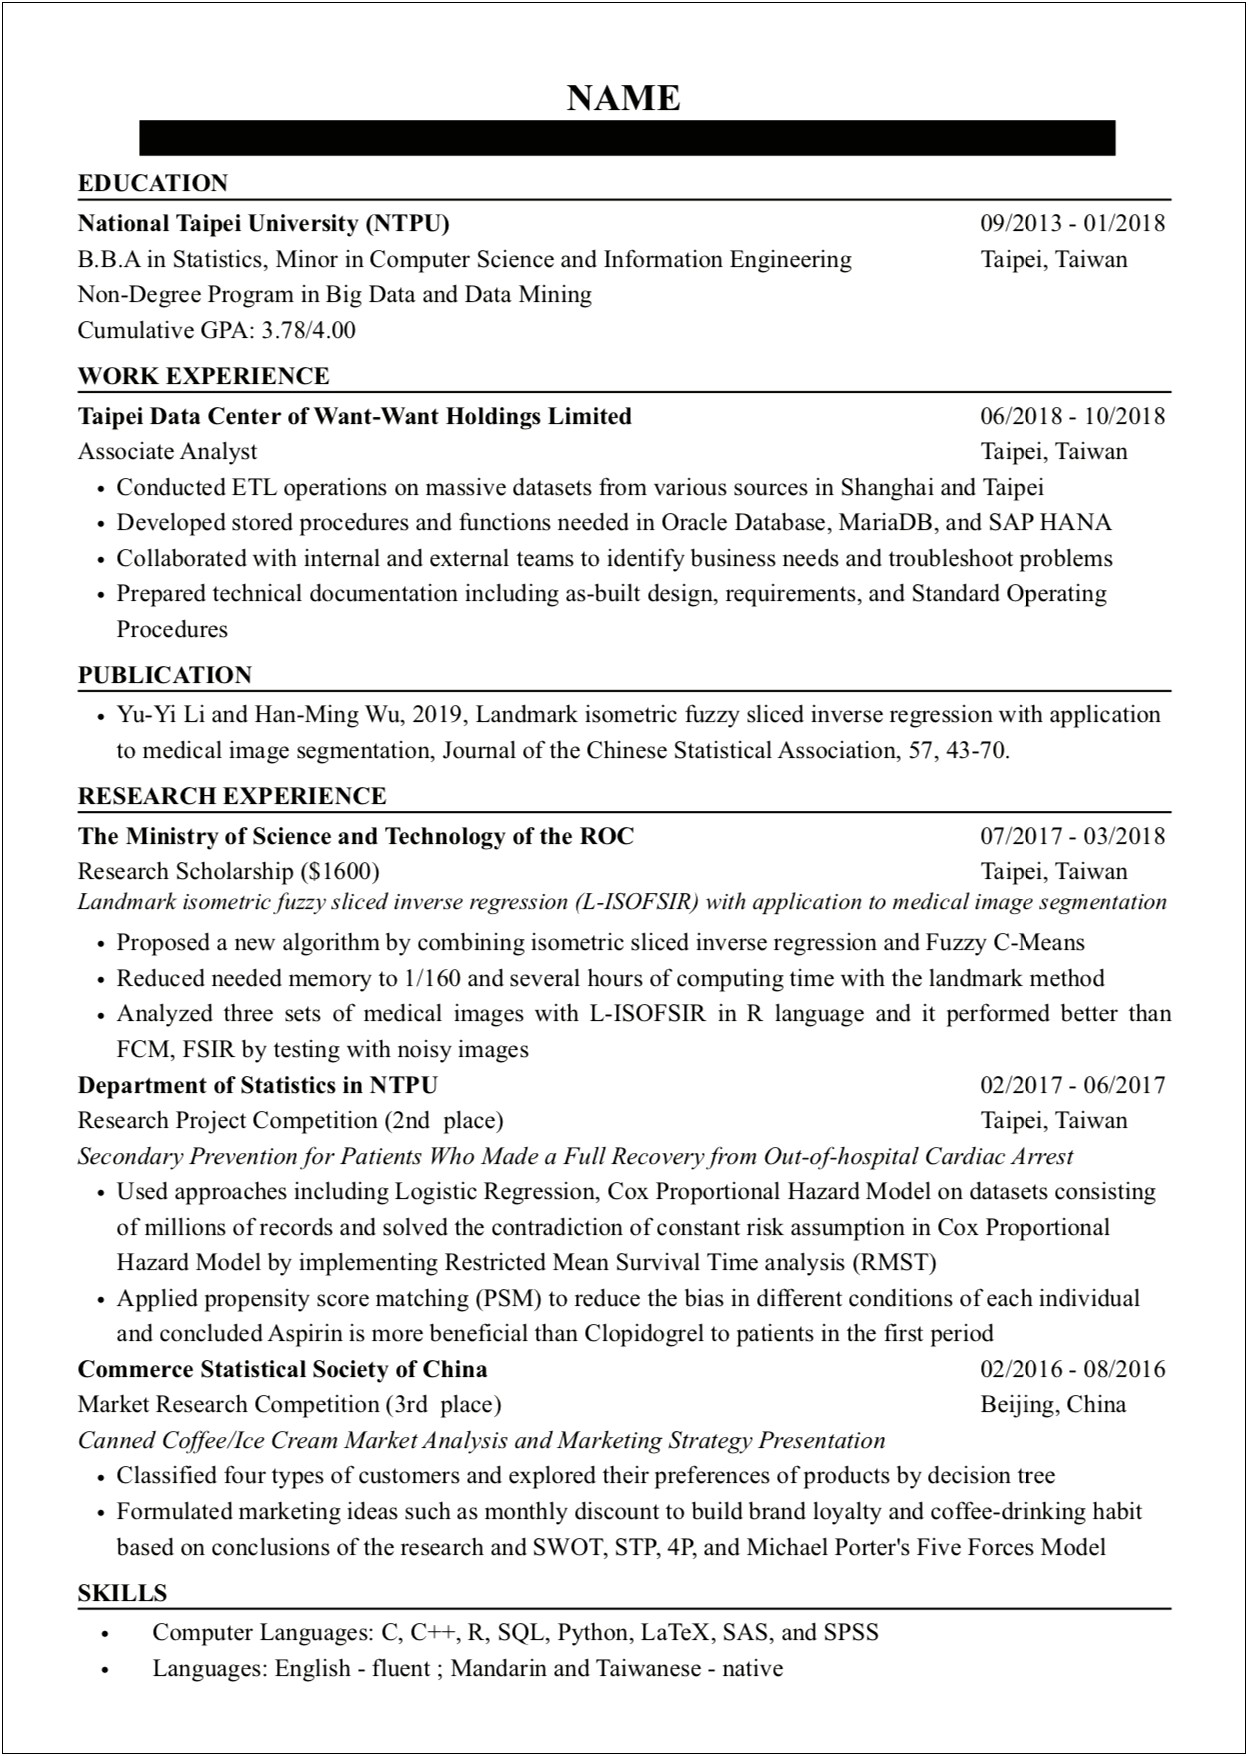 Sample Resume For Masters In Computer Science